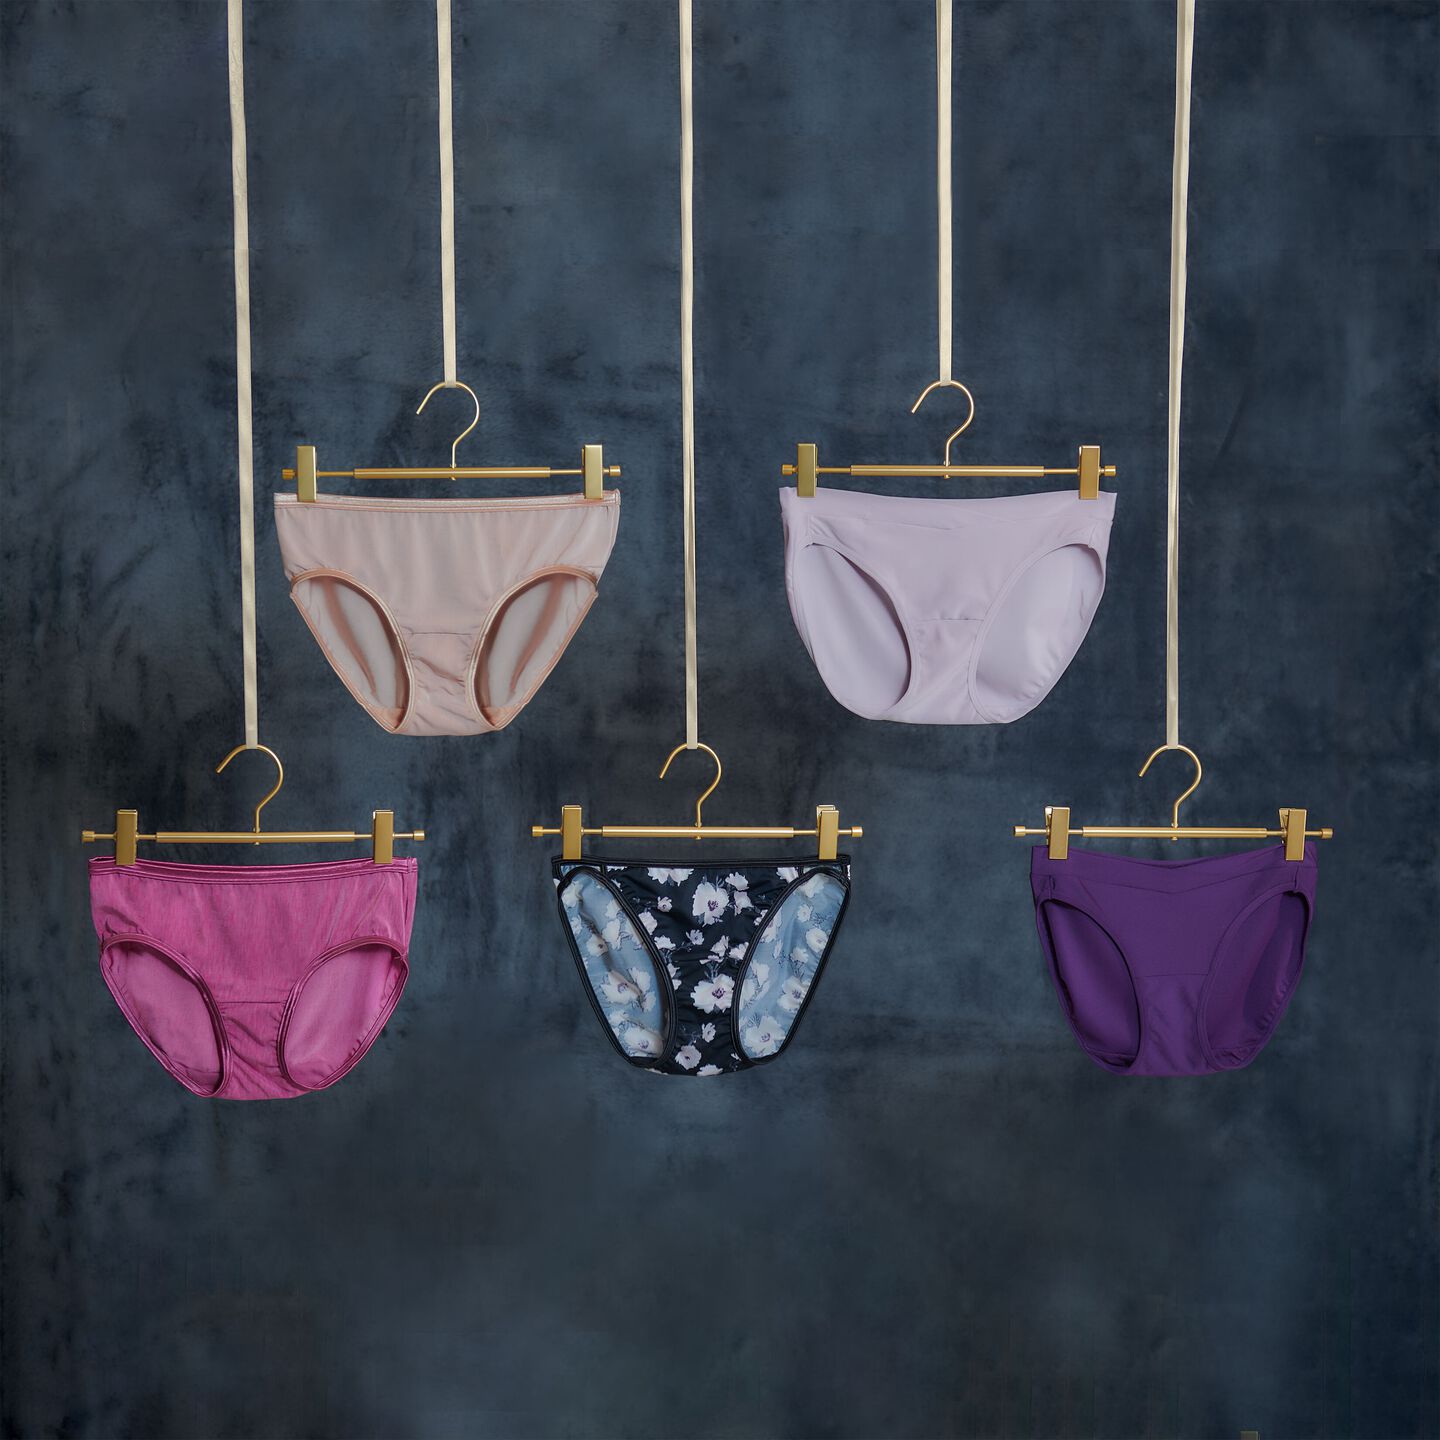 Here's Why You Should Get Know About Types Of Panties - Iconic